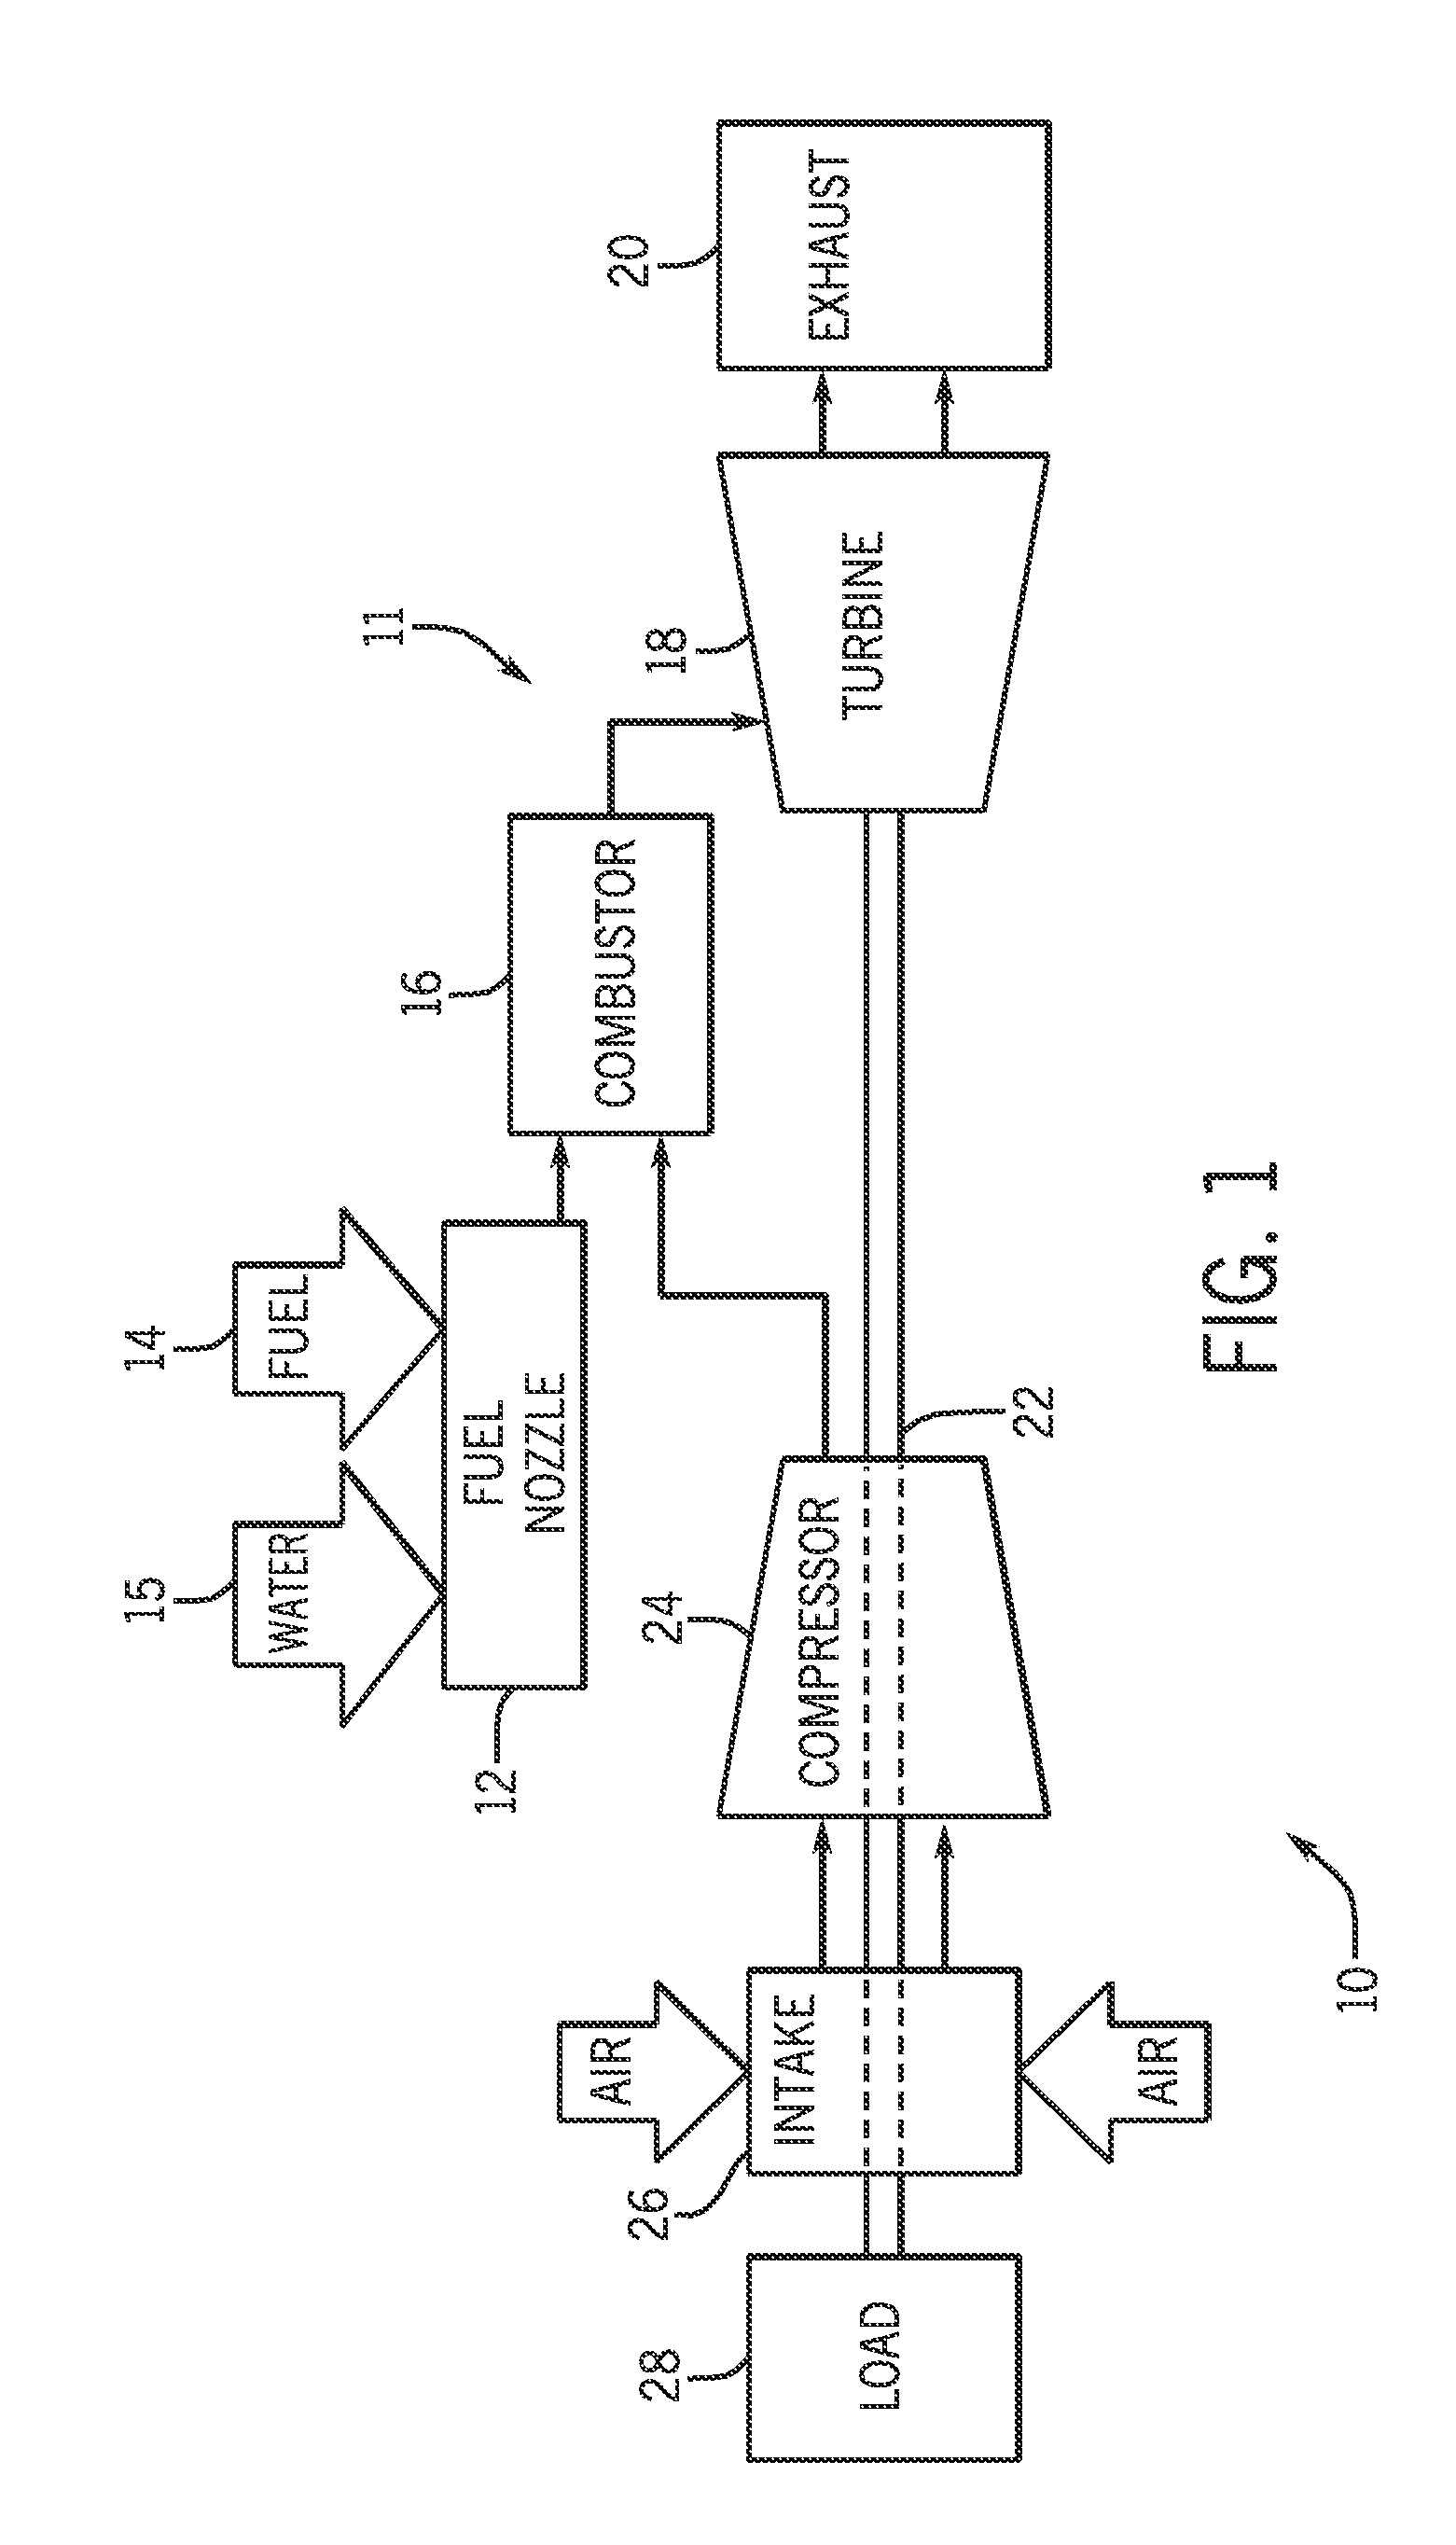 System for turbine combustor fuel mixing